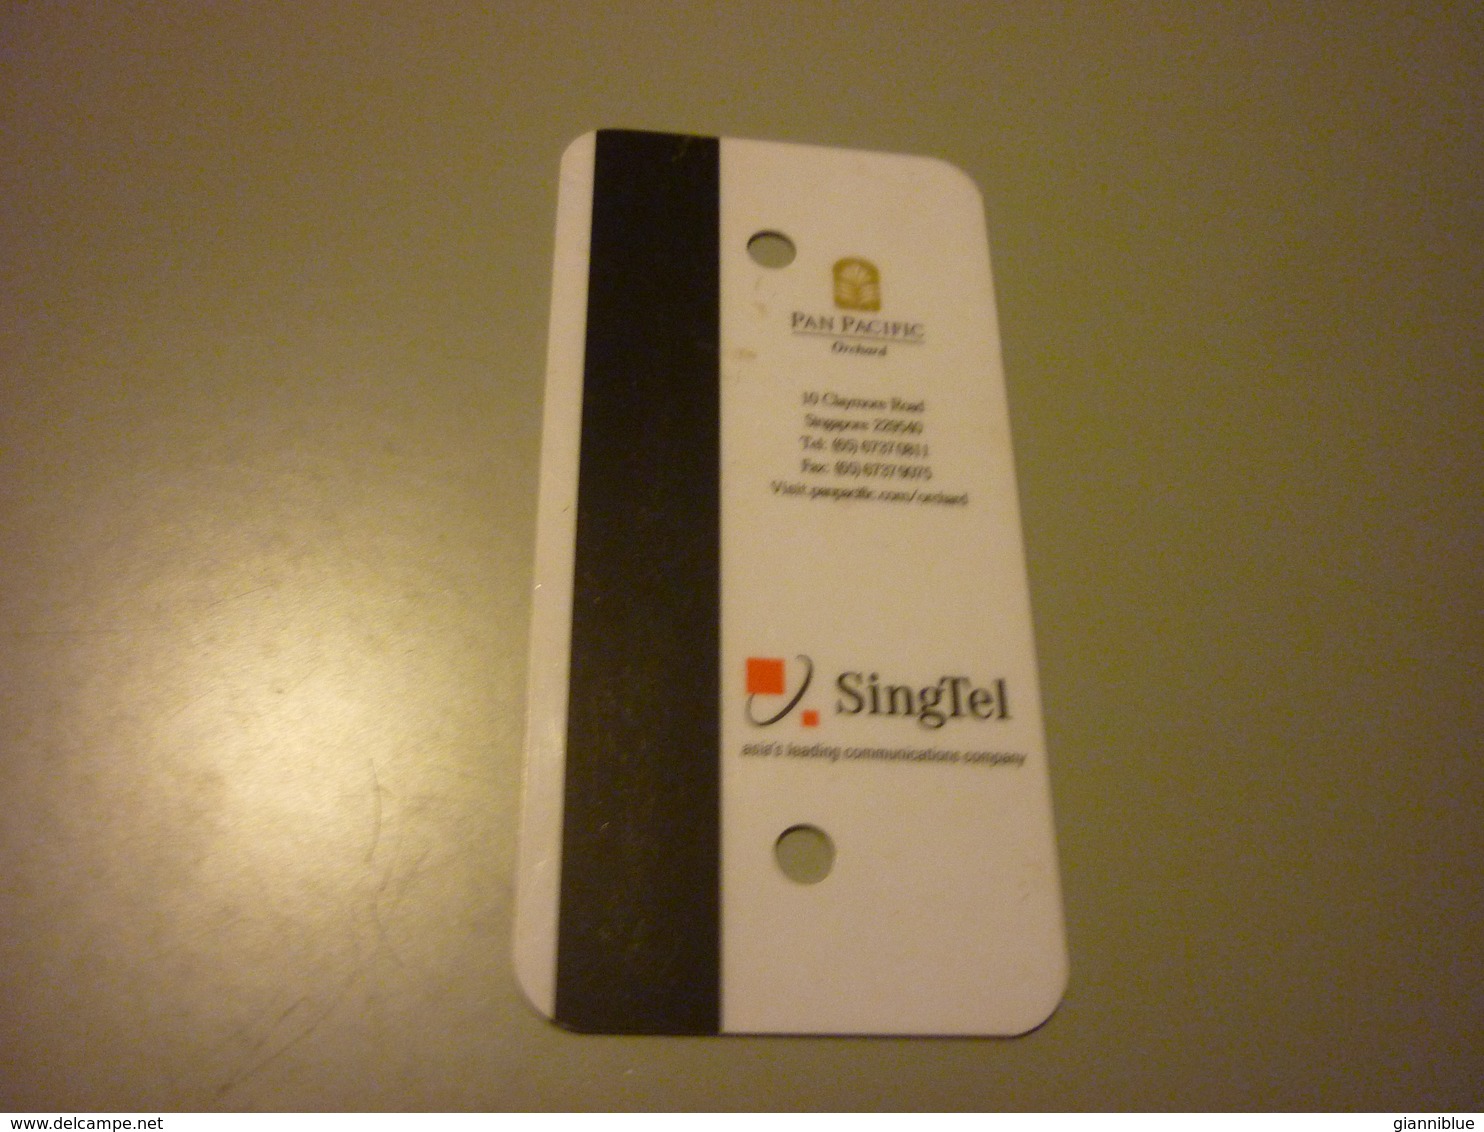 Singapore Pan Pacific Orchard Hotel Room Key Card (SingTel) - Cartes D'hotel